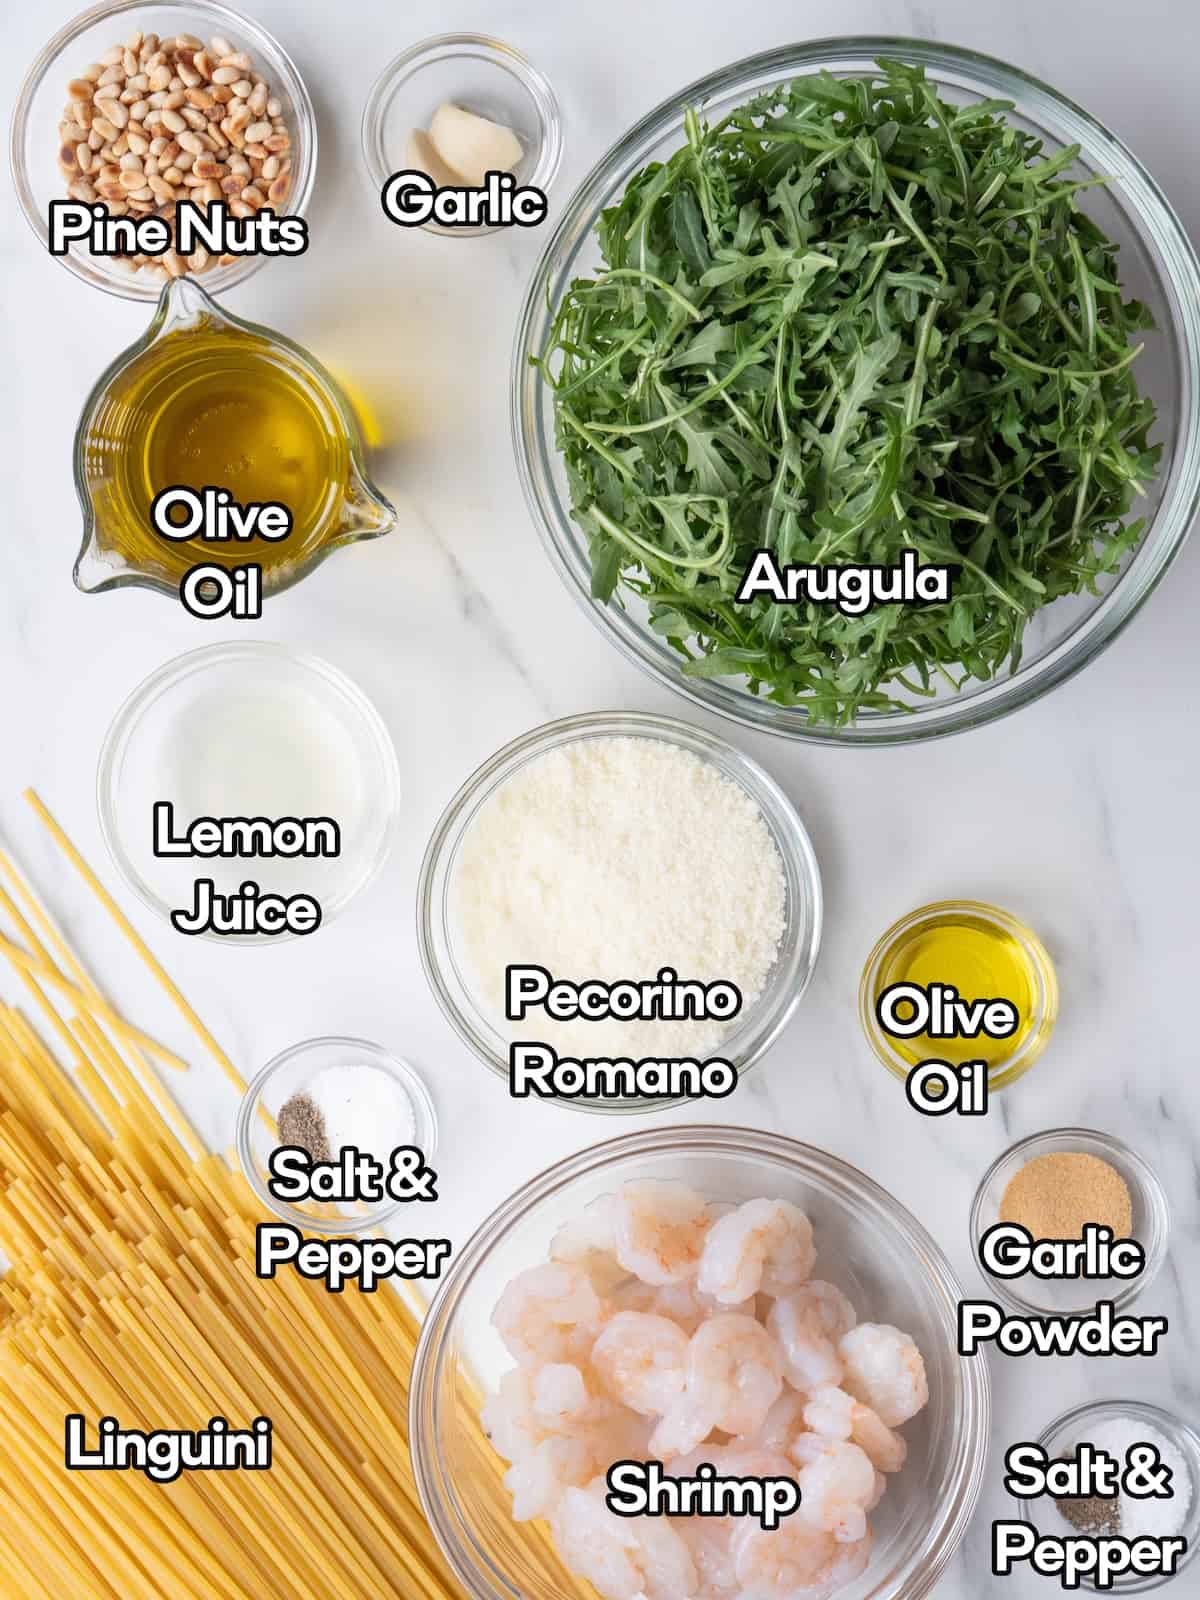 Mise en place of all the ingredients required to make arugula pesto pasta with garlic shrimp.